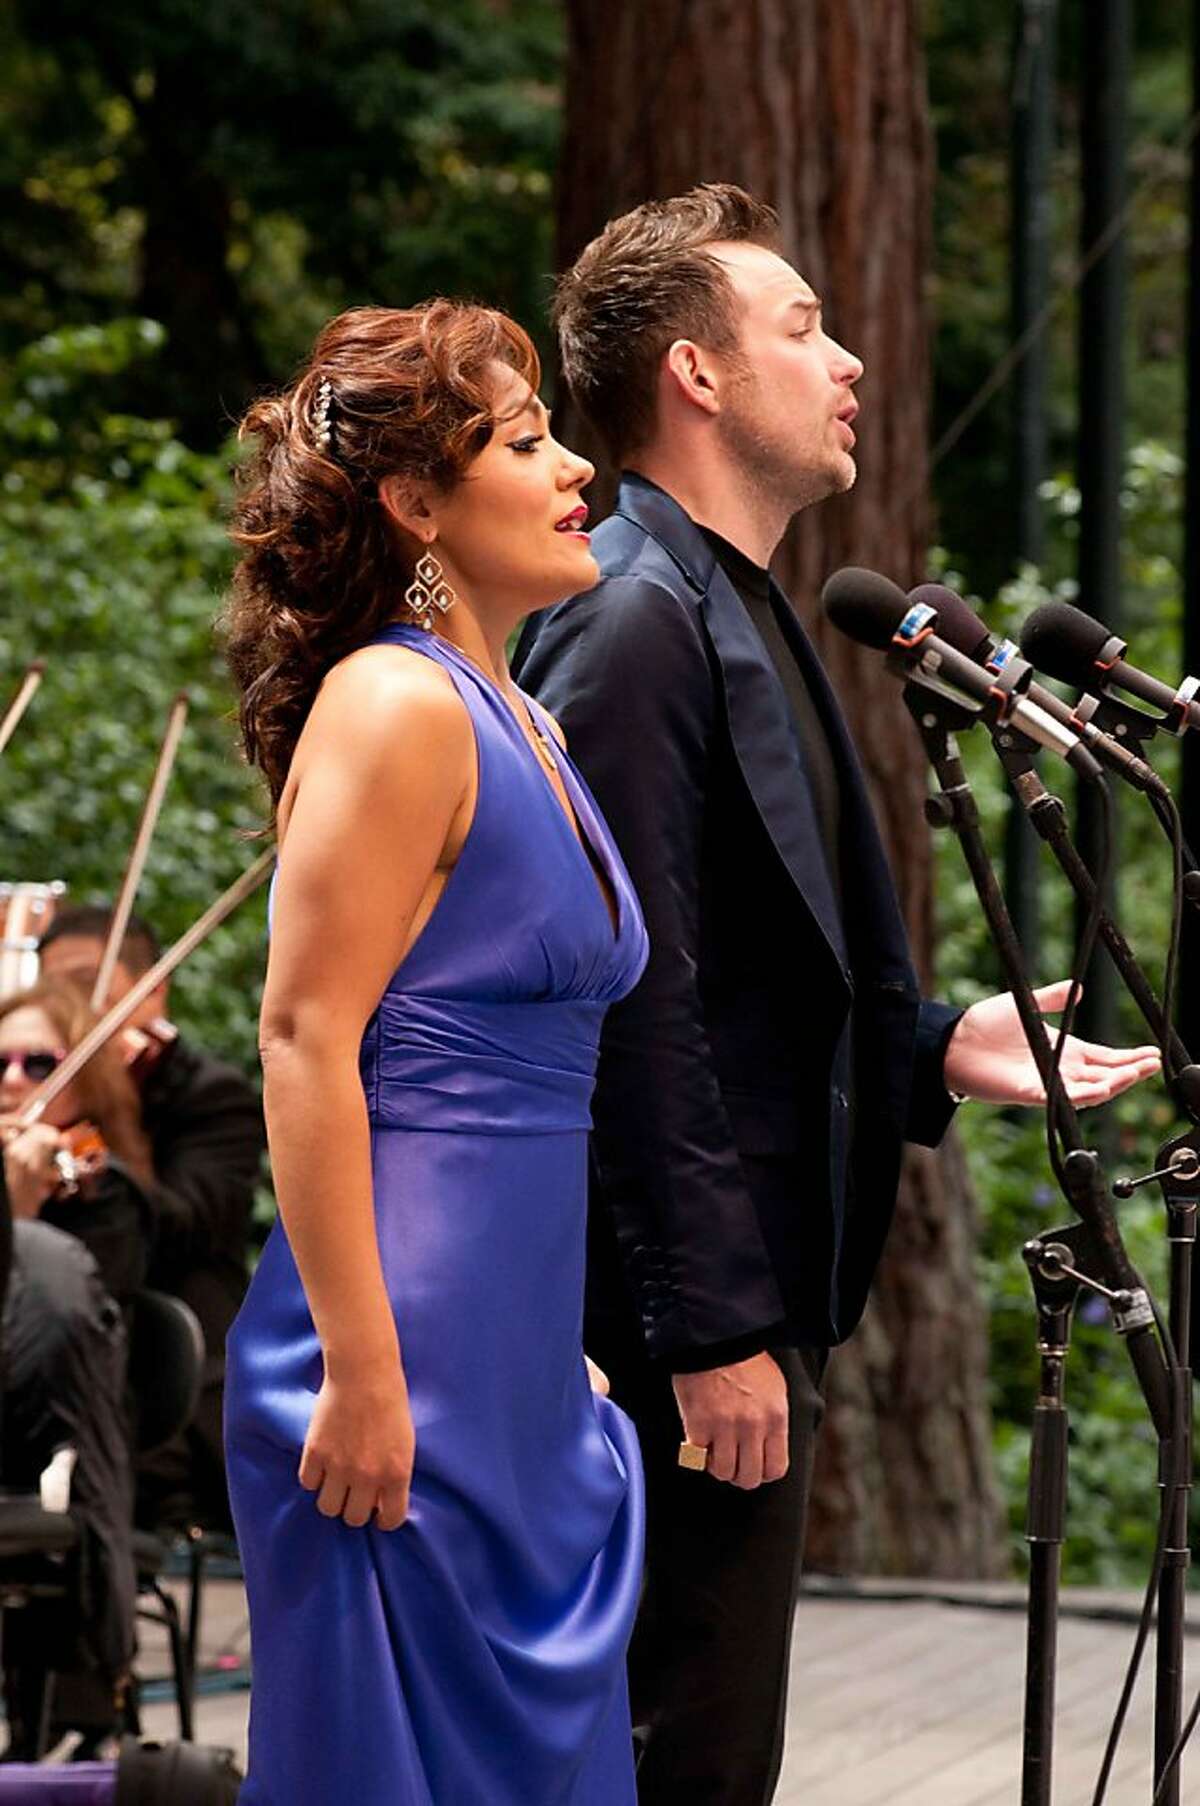 Soprano Ailyn Pérez (l.) and tenor Stephen Costello sing with the San Francisco Opera in Stern Grove, 8/18/13